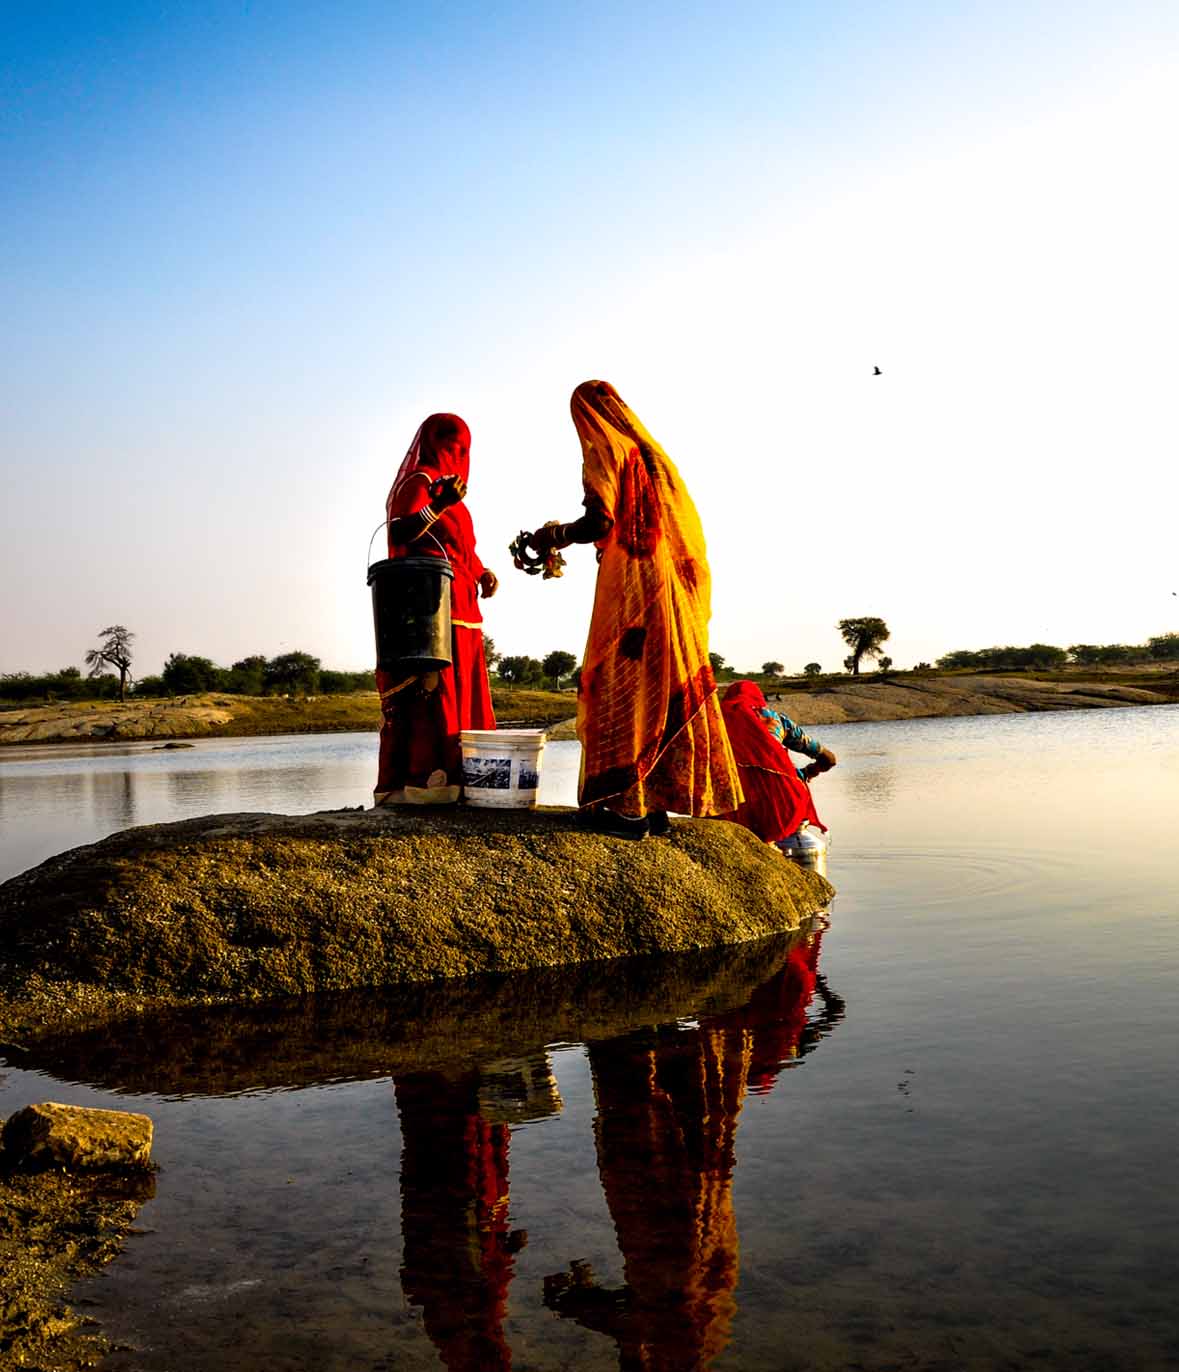 Rajasthani women in a village of Rajasthan fetching water from a natural lake I women of Rajasthan Dressed in bright clothesRajasthani women in a village in Rajasthan fetching water from a natural lake I Beauty of unseen Rajasthan on a Motorcycle